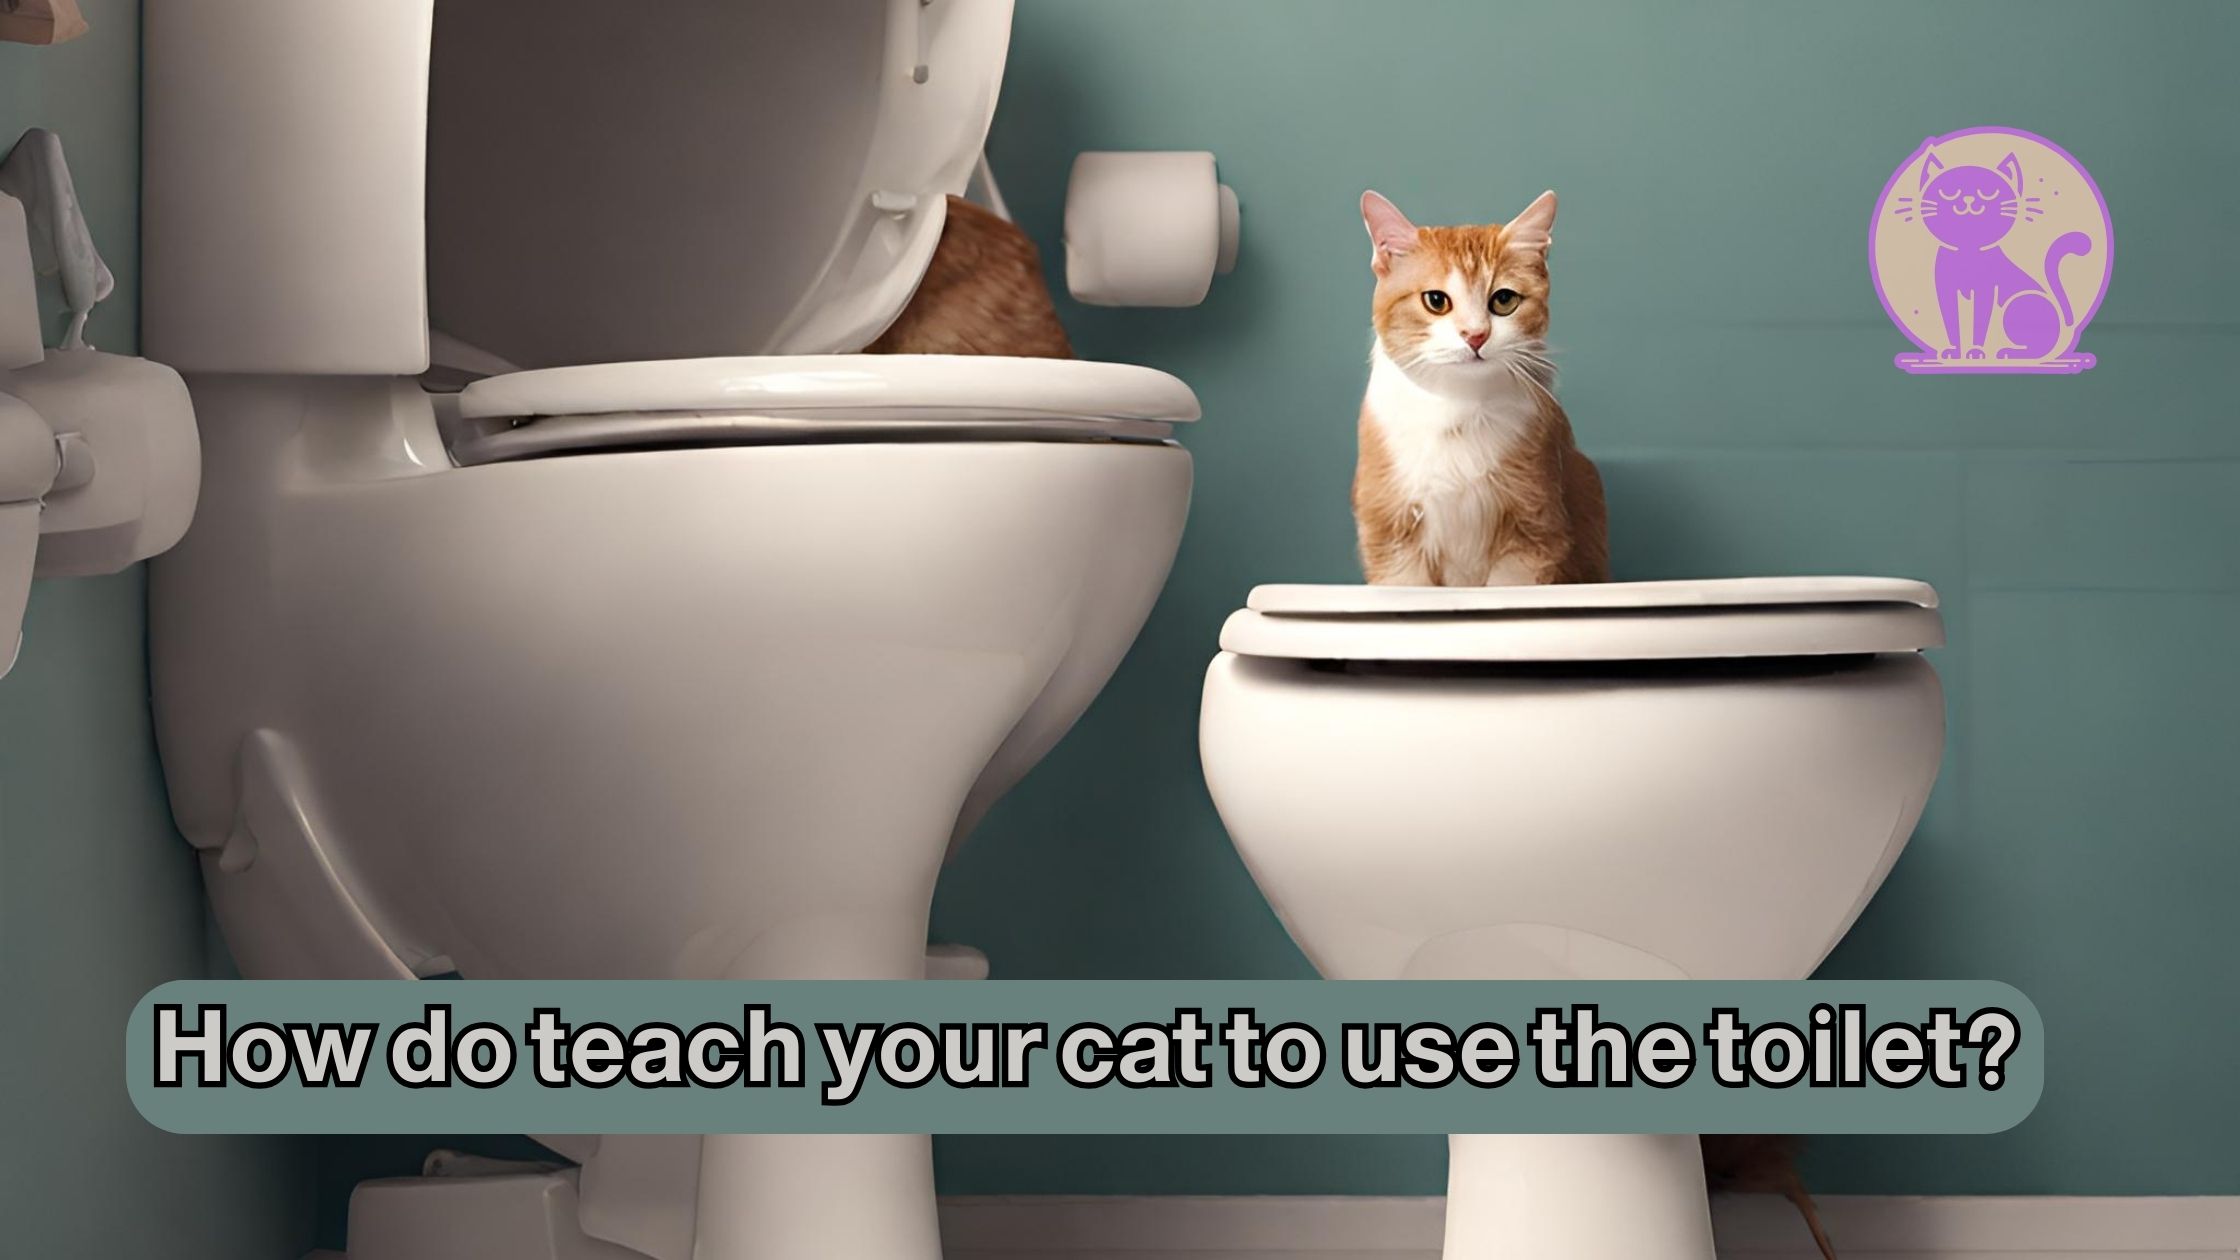 How do teach your cat to use the toilet